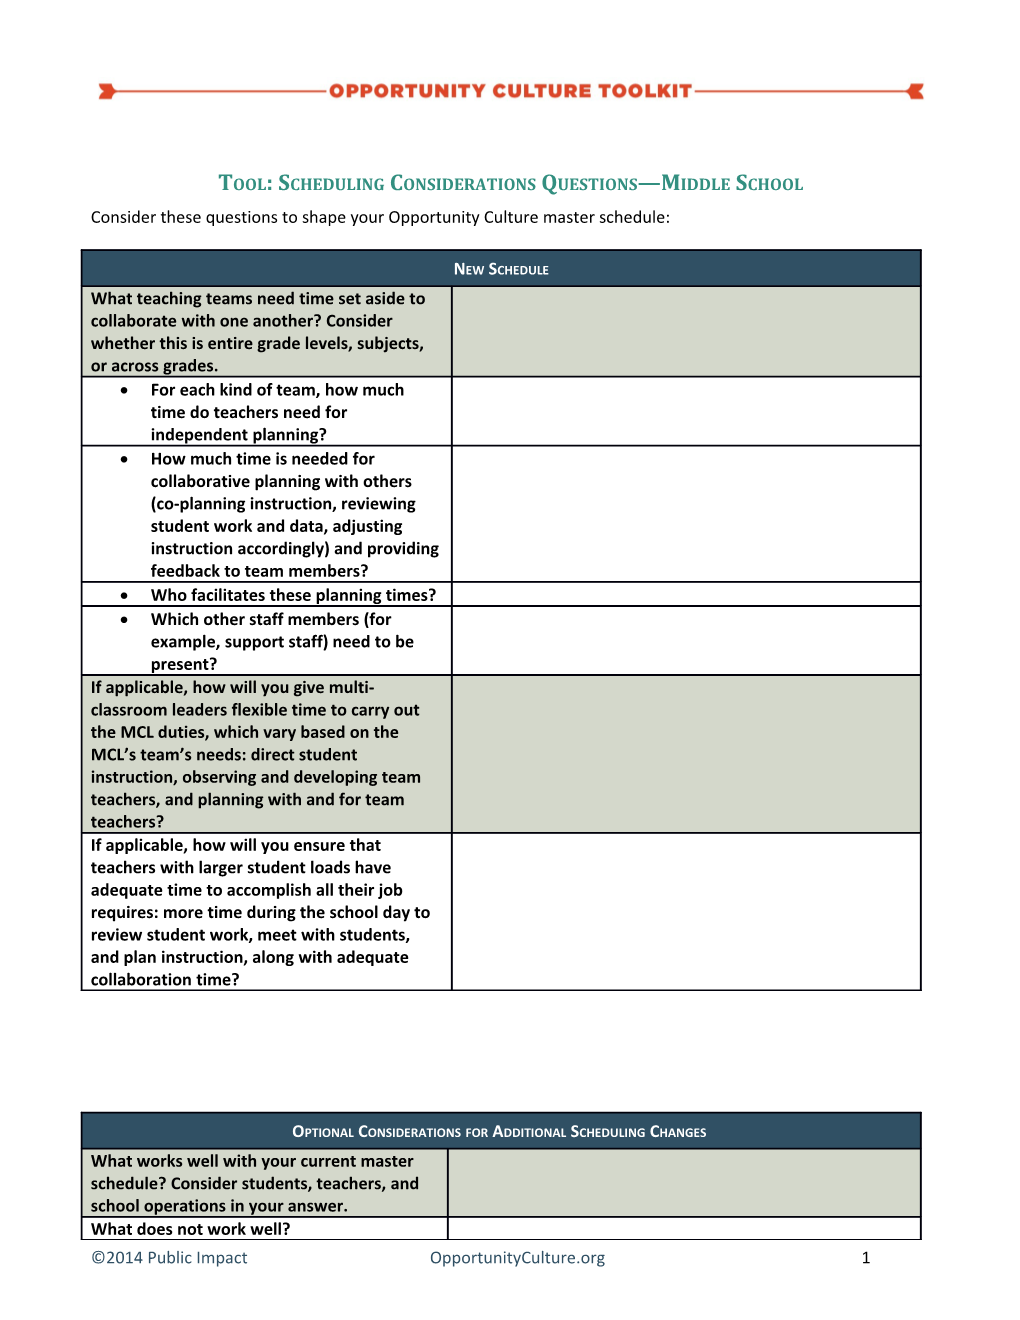 Tool: Schedulingconsiderations Questions Middle School